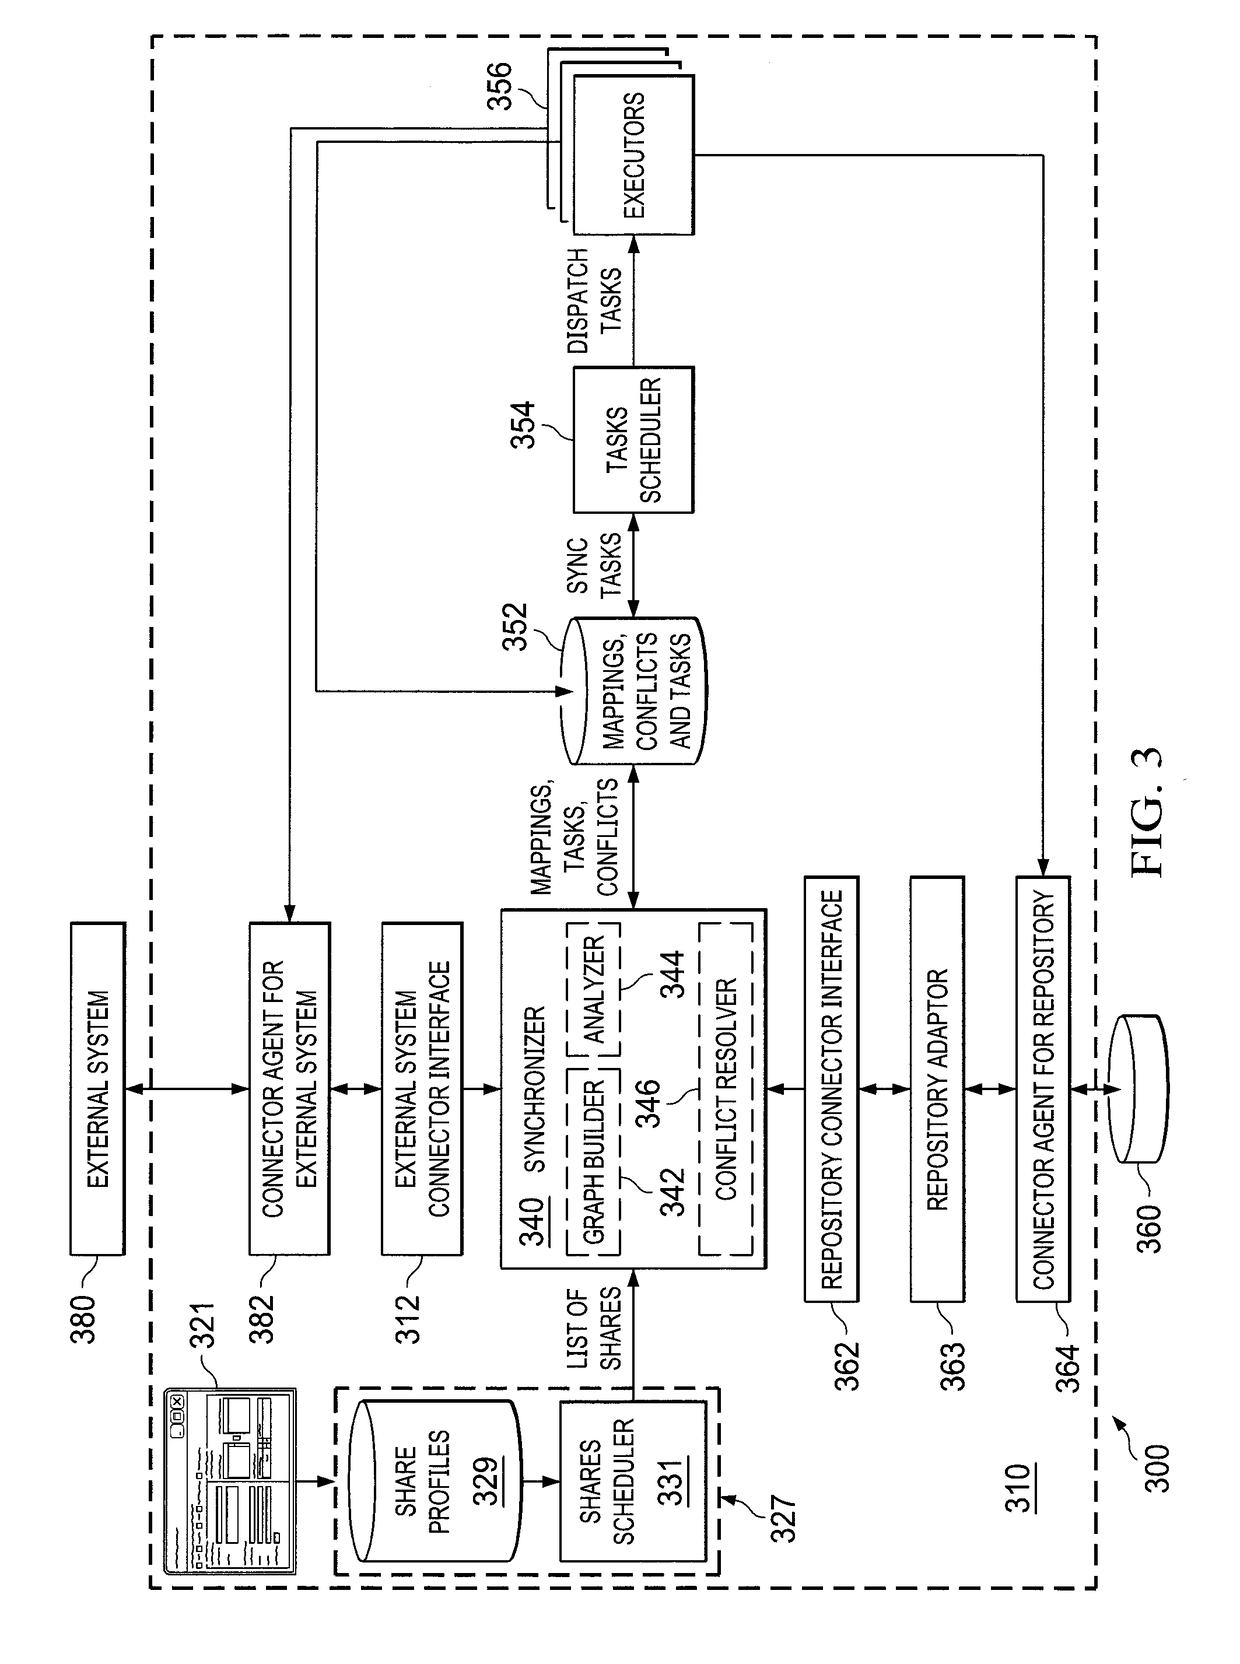 Systems and methods for content sharing through external systems